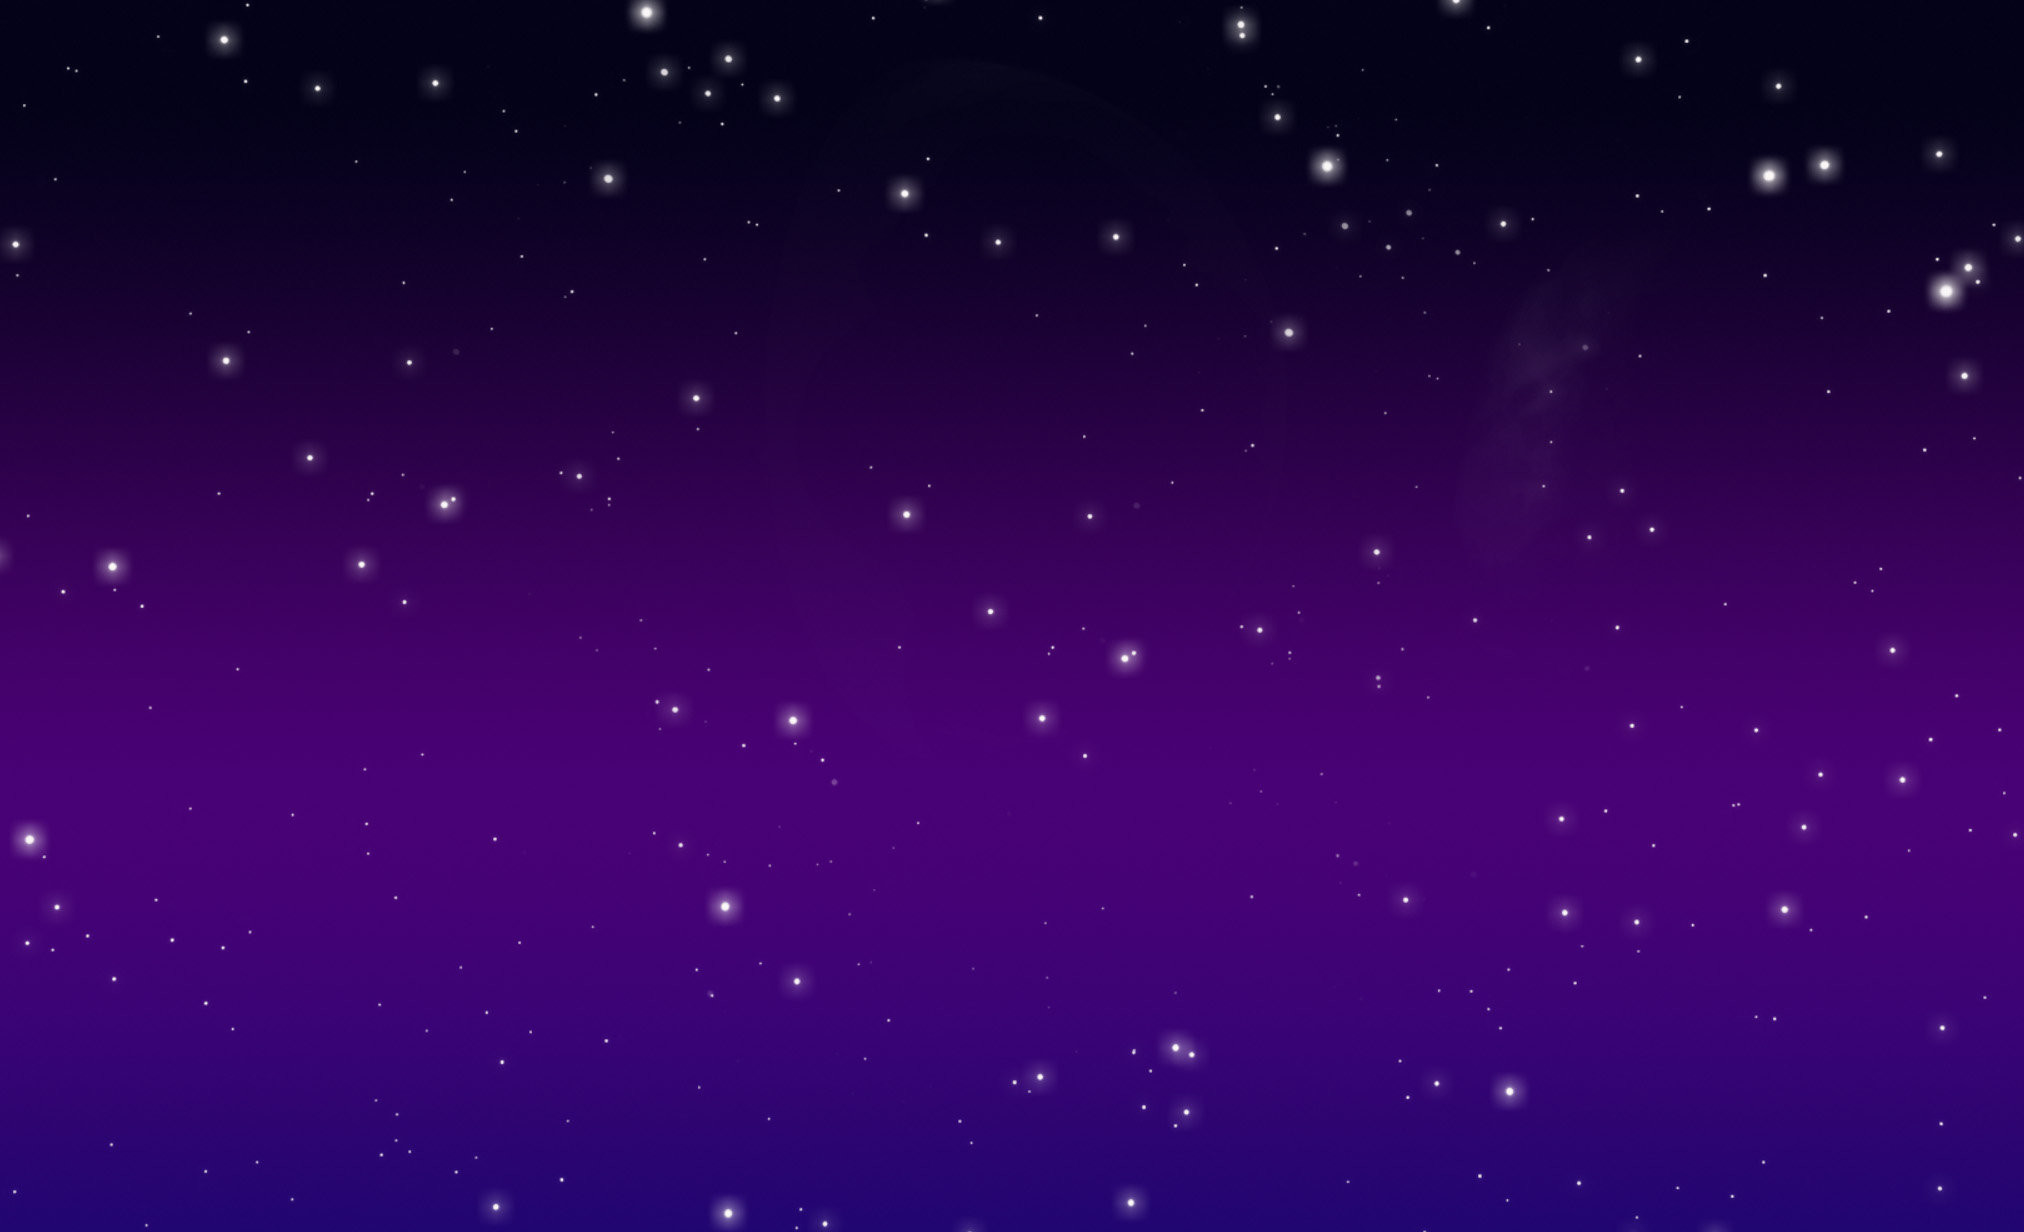 2024x1232 FREE:Purple Space Background by Magical-Mama ...